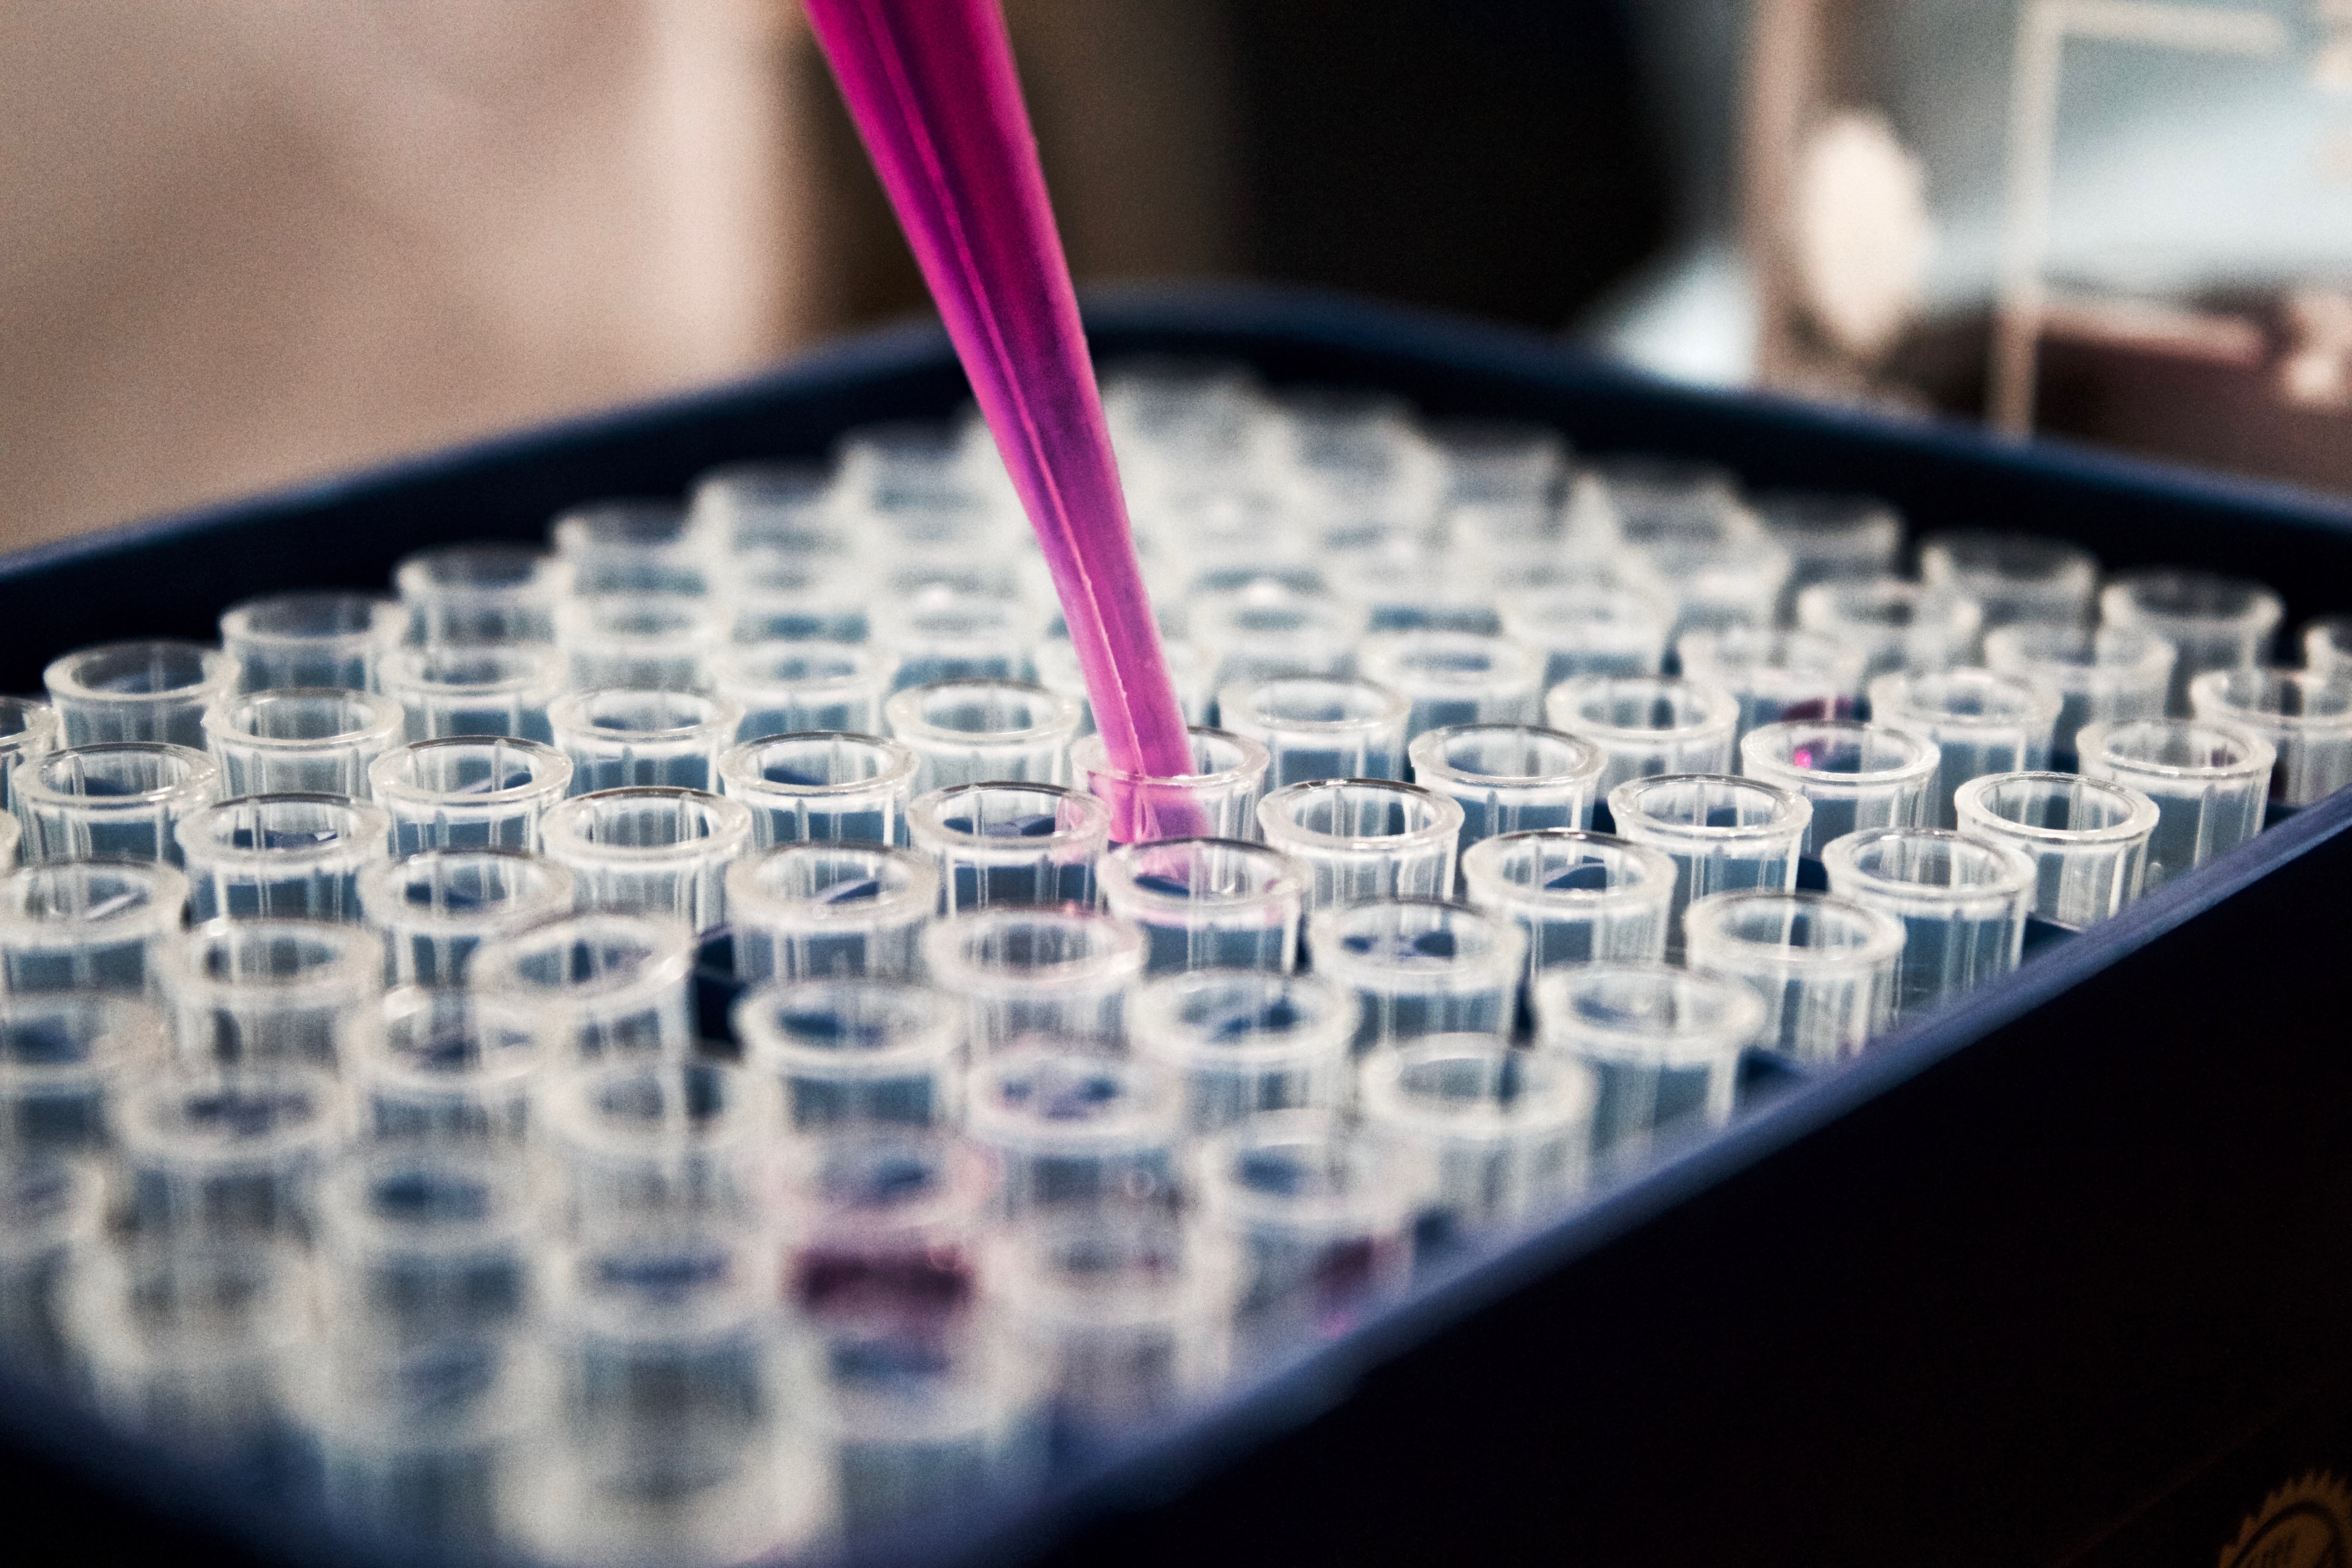 A tray of test tubes being filled with a pipette of pink liquid